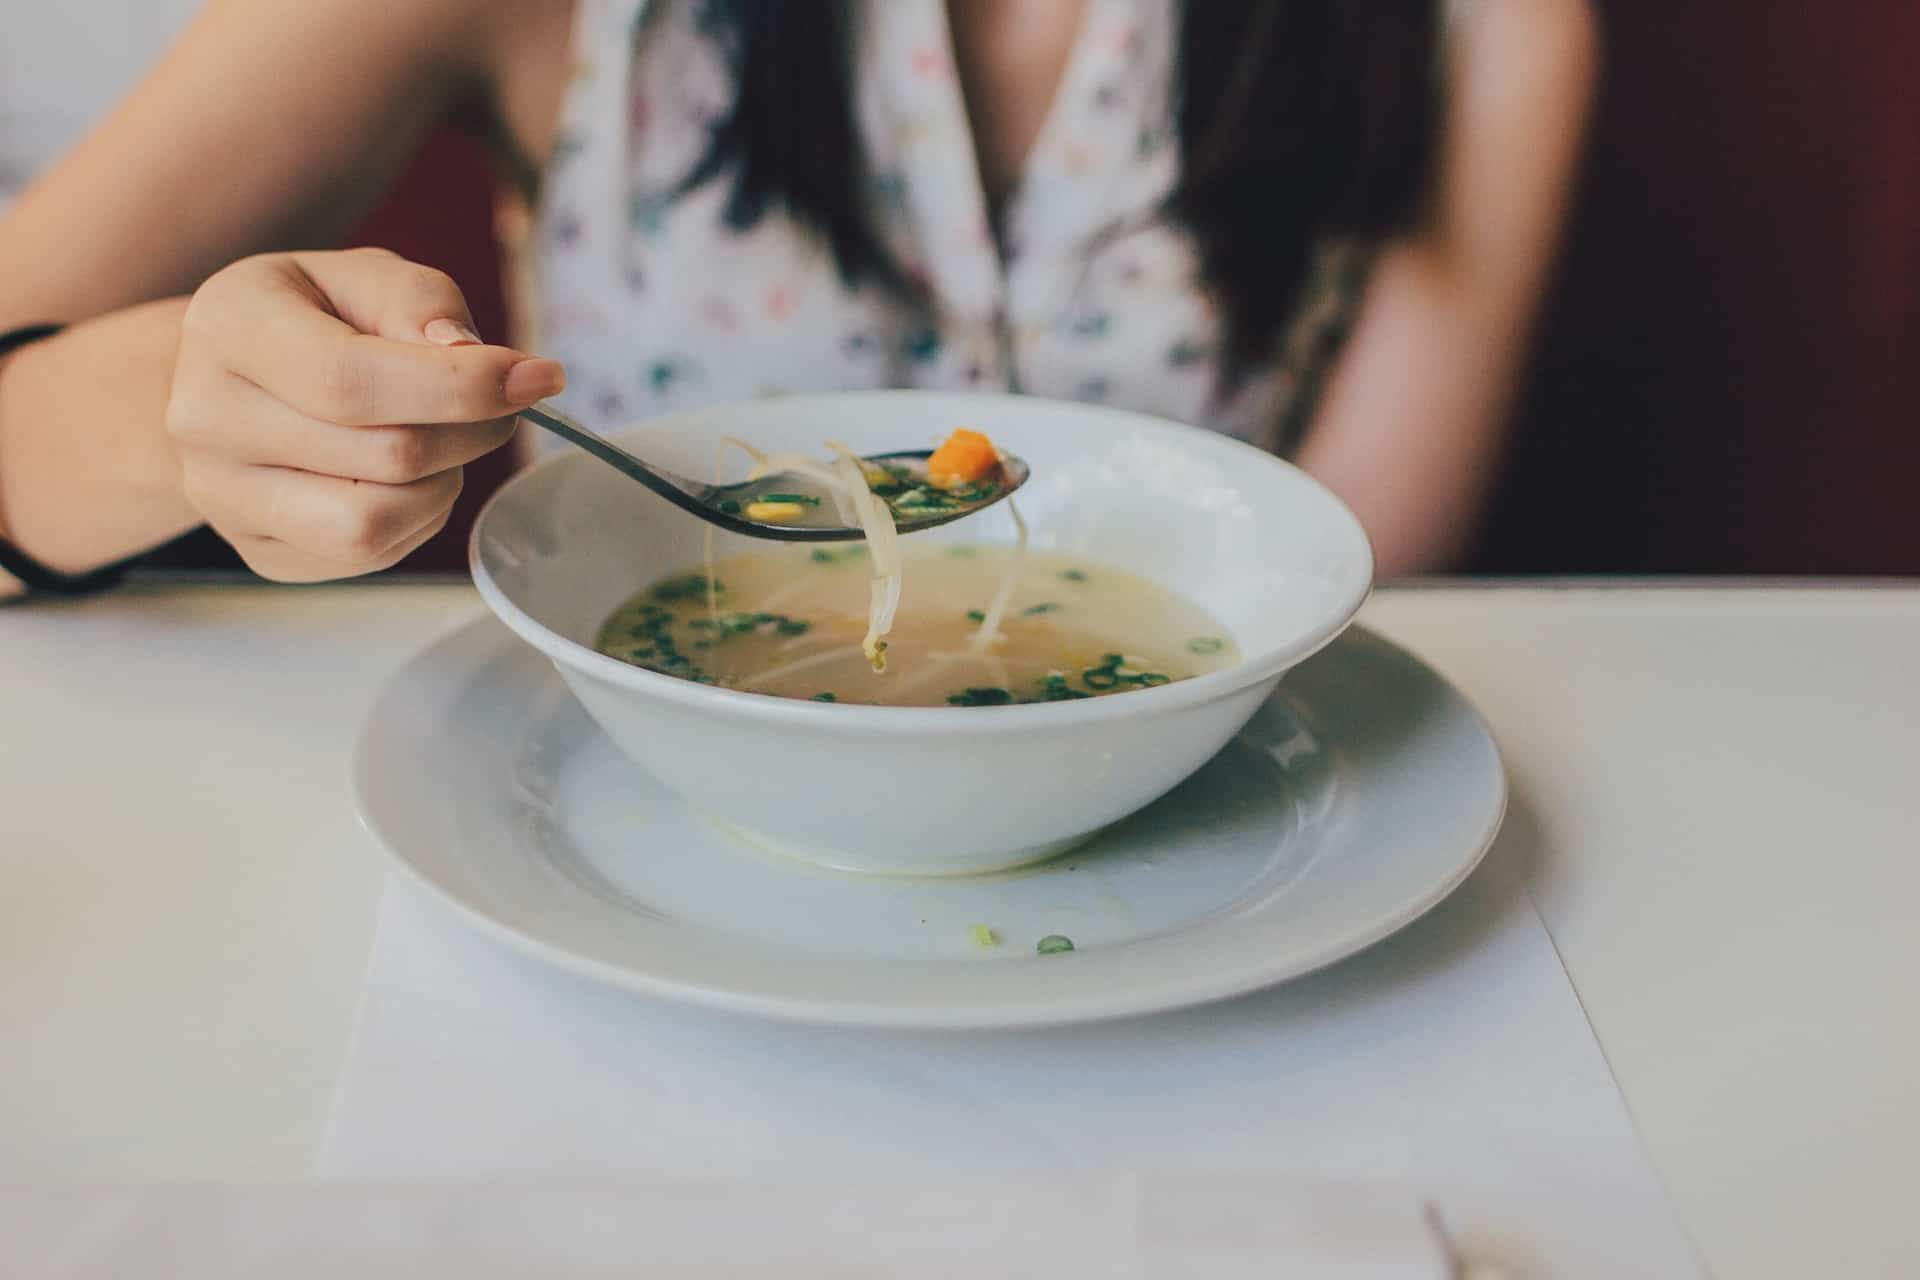 Front shot of woman eating bowl of soup from a white bowl on a white plate.